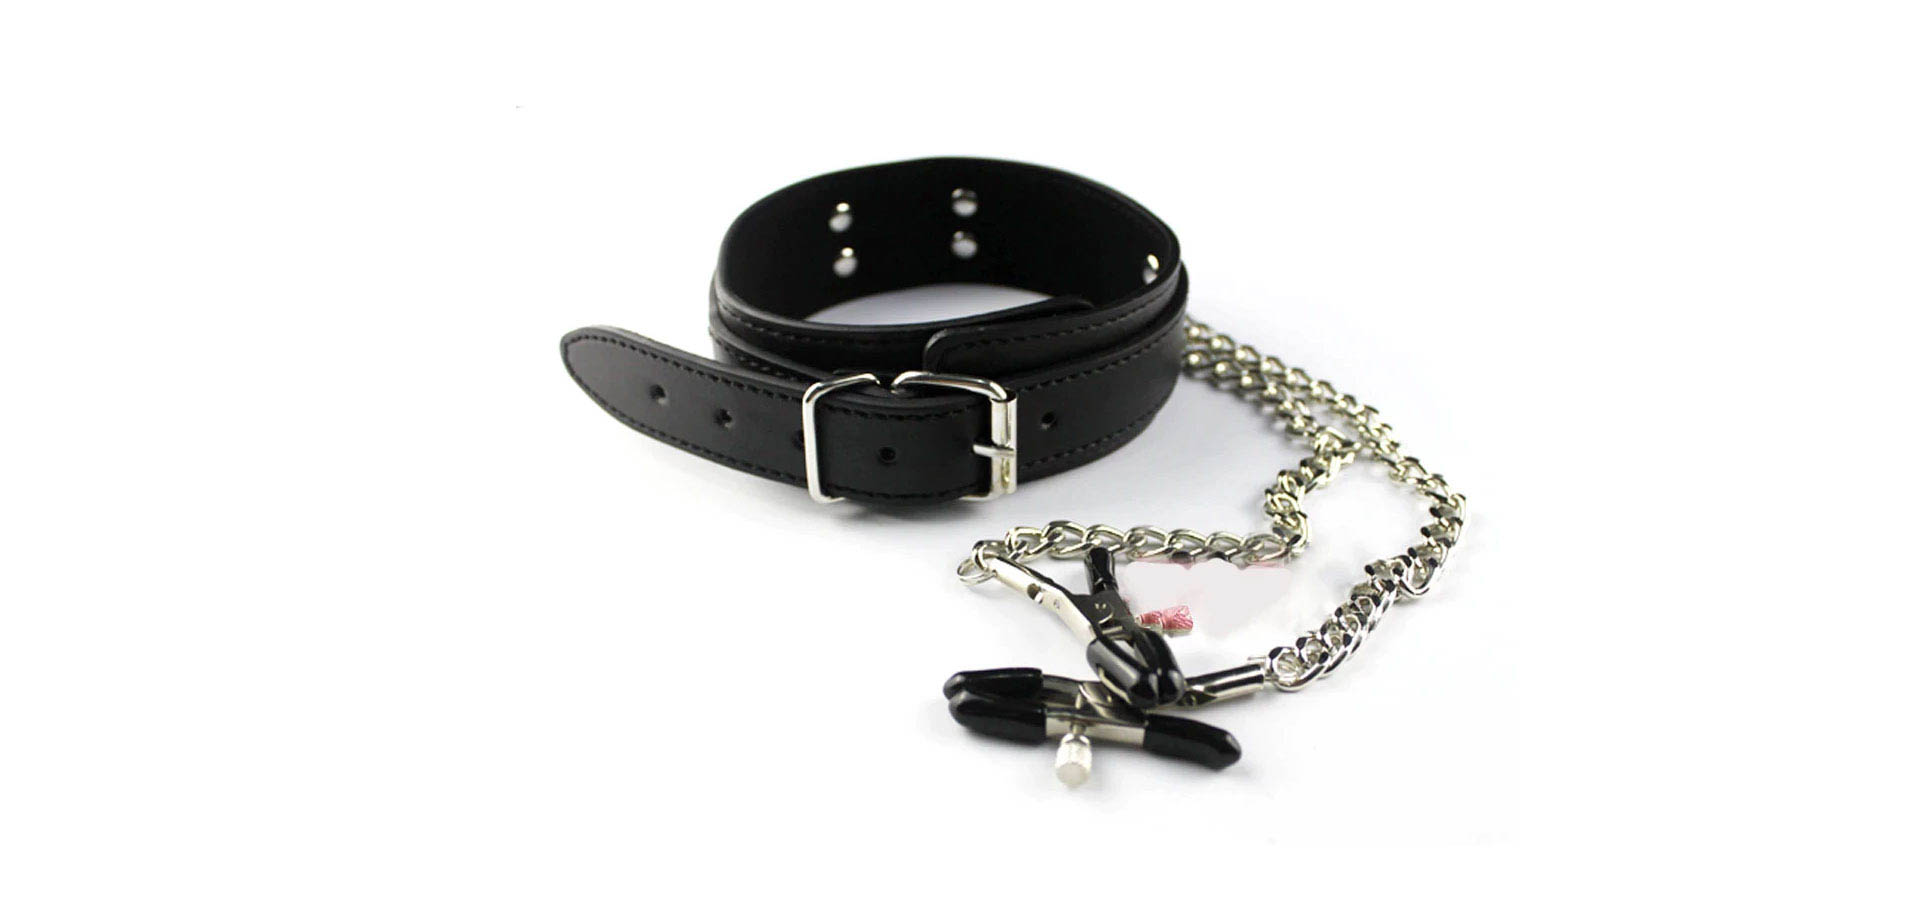 Leather Bondage Collar with Nipple Clips.